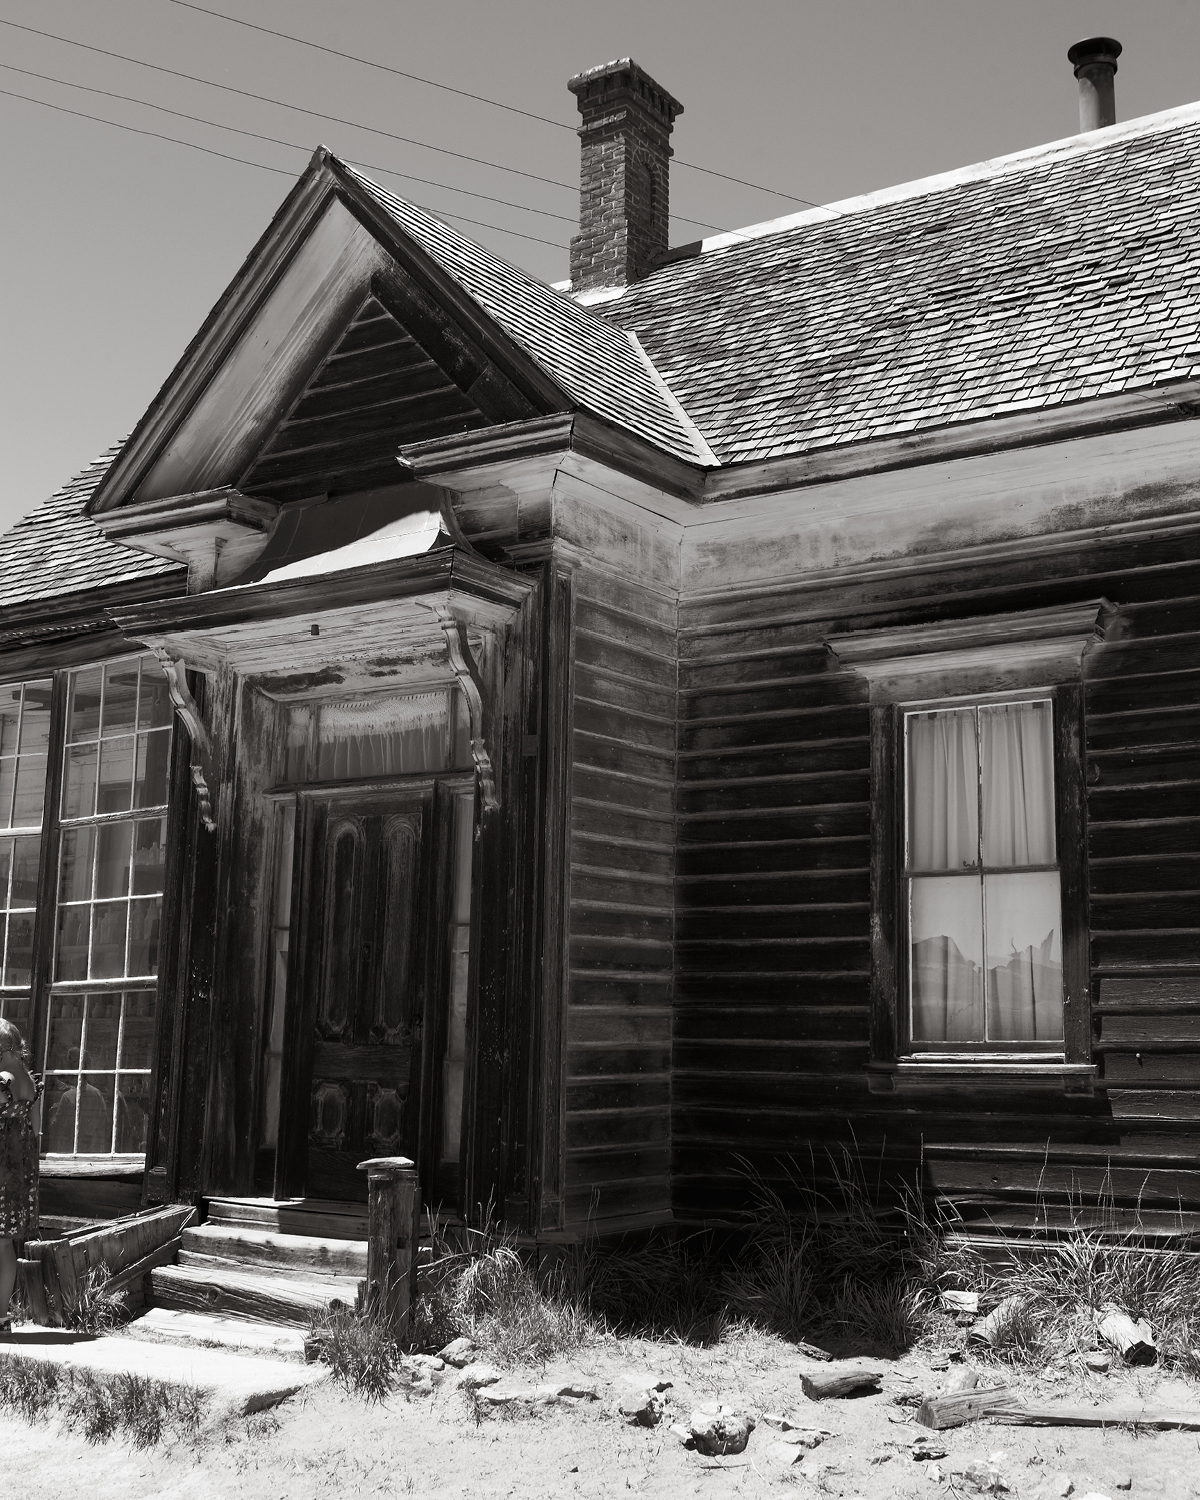  BODIE GHOST TOWN 